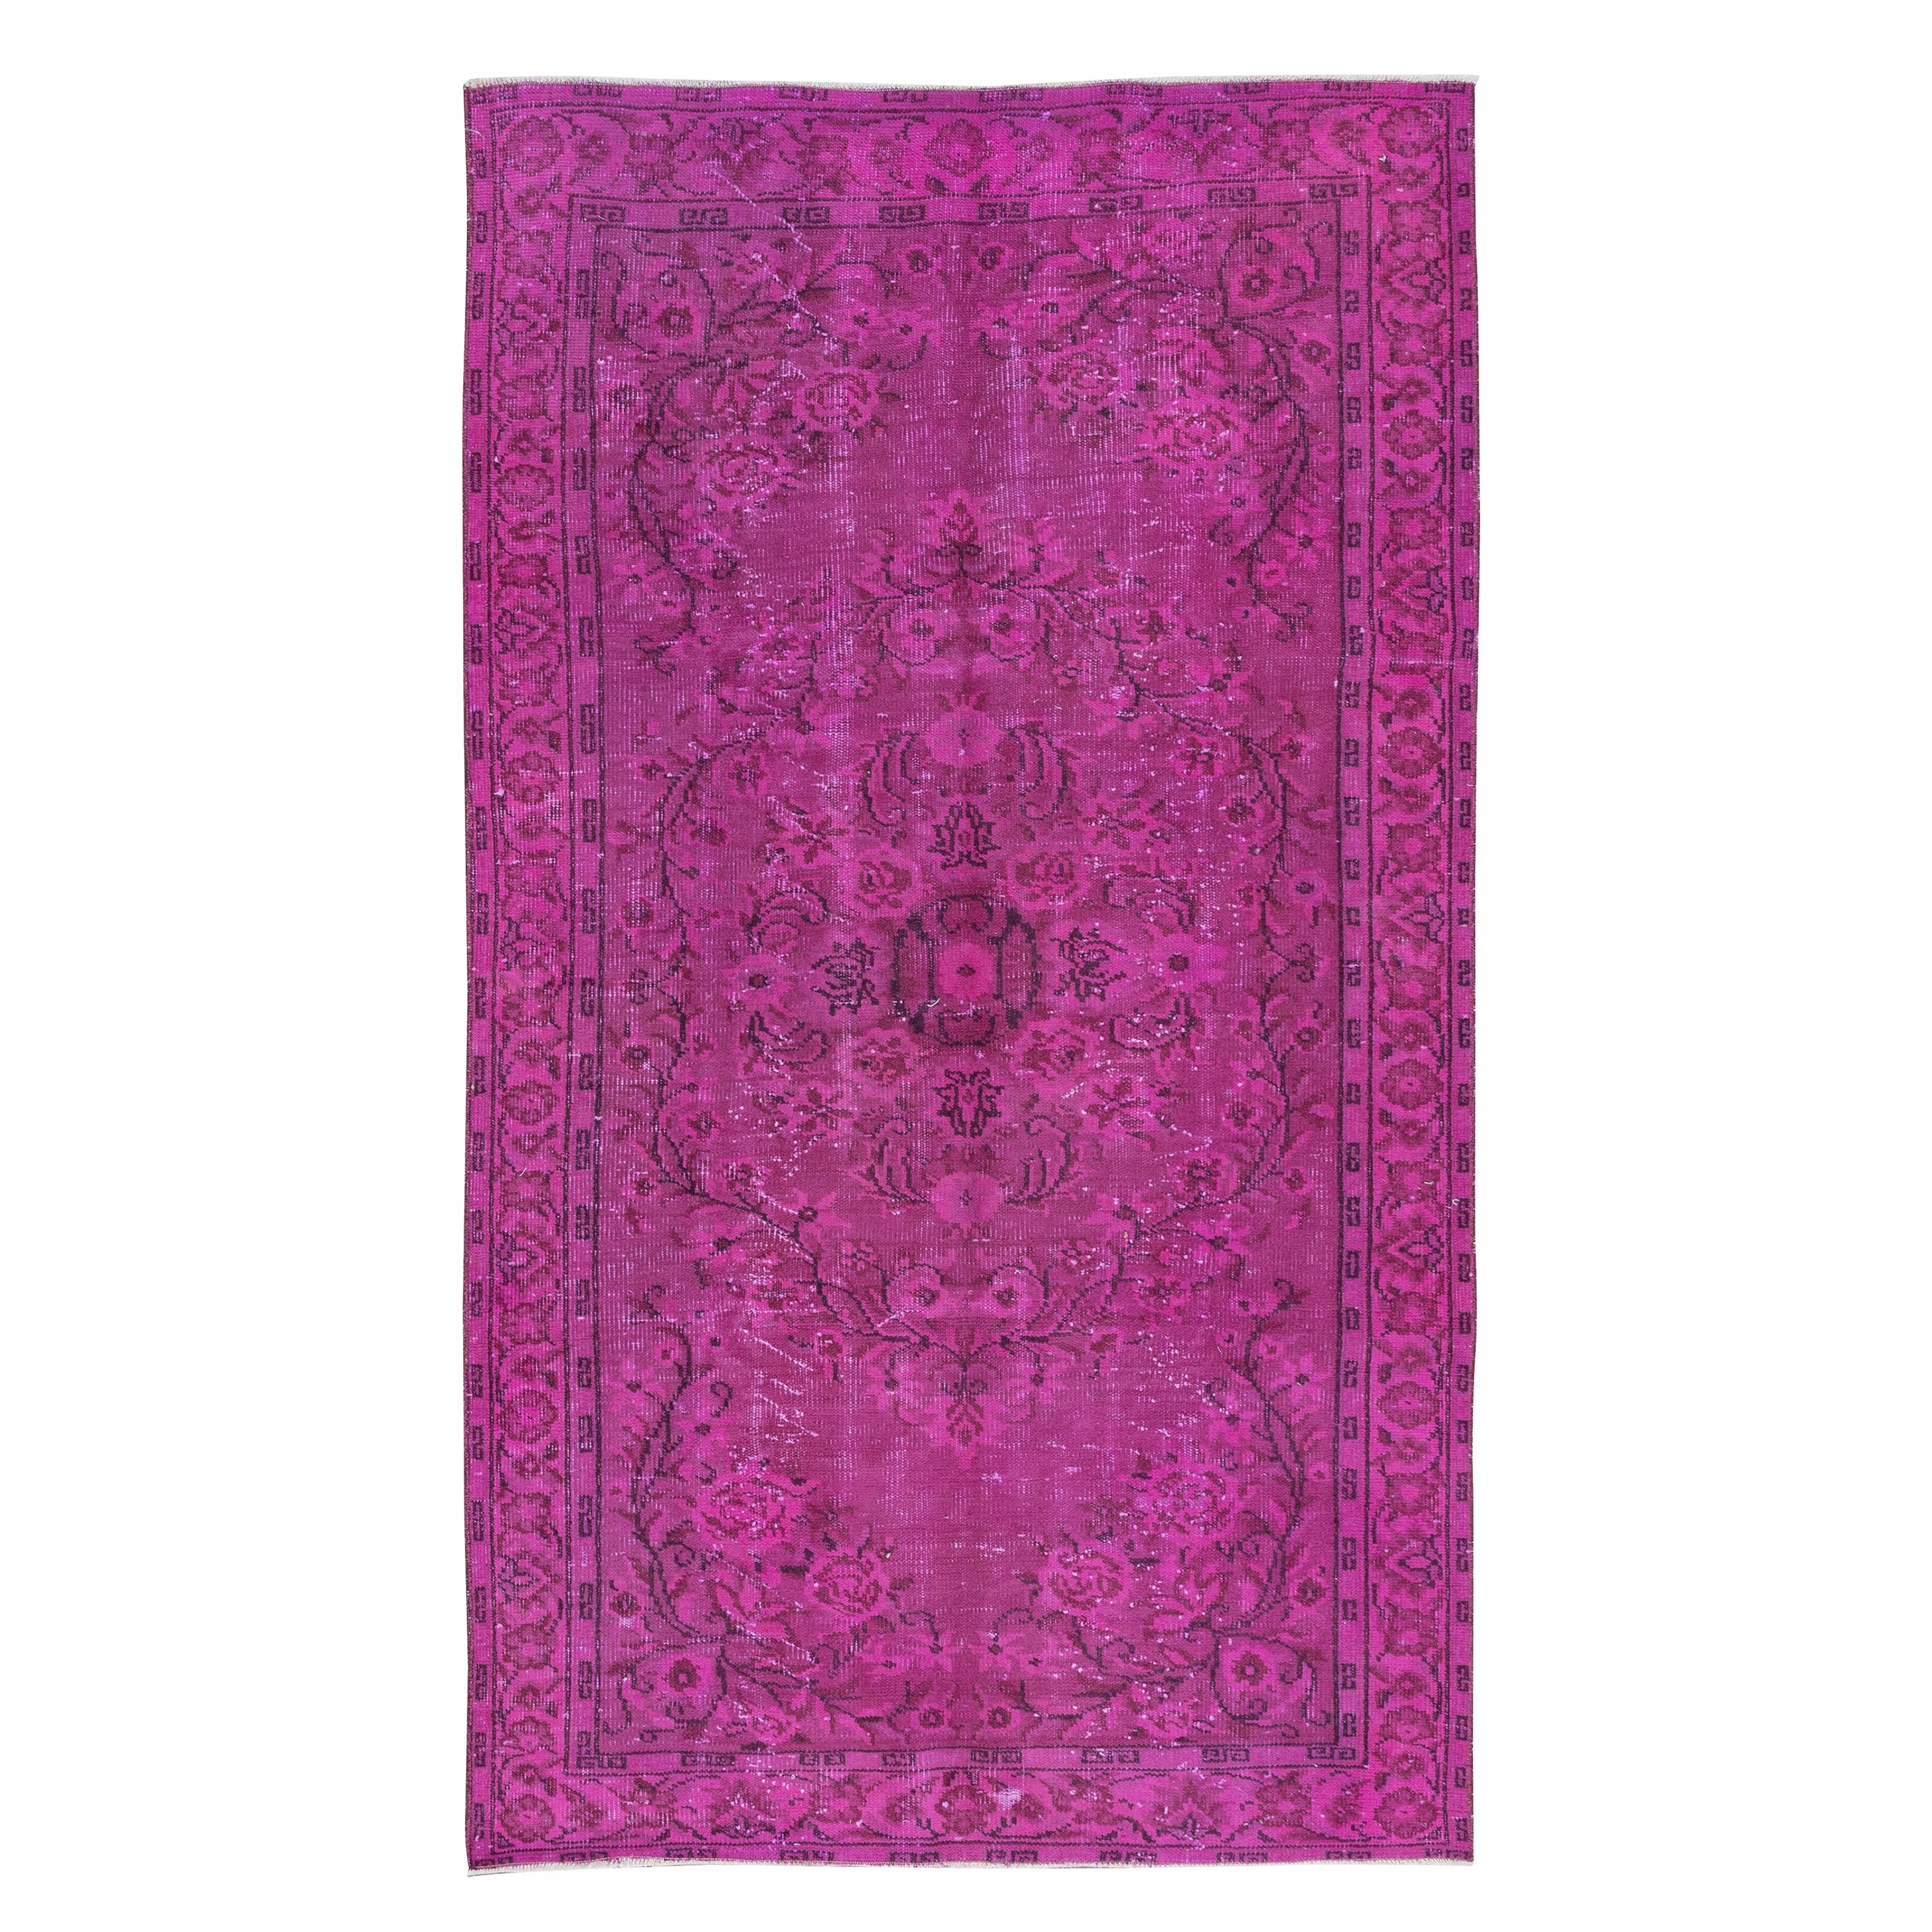 4.5x7.8 Ft Contemporary Pink Area Rug, Handmade Turkish Carpet, Floor Covering